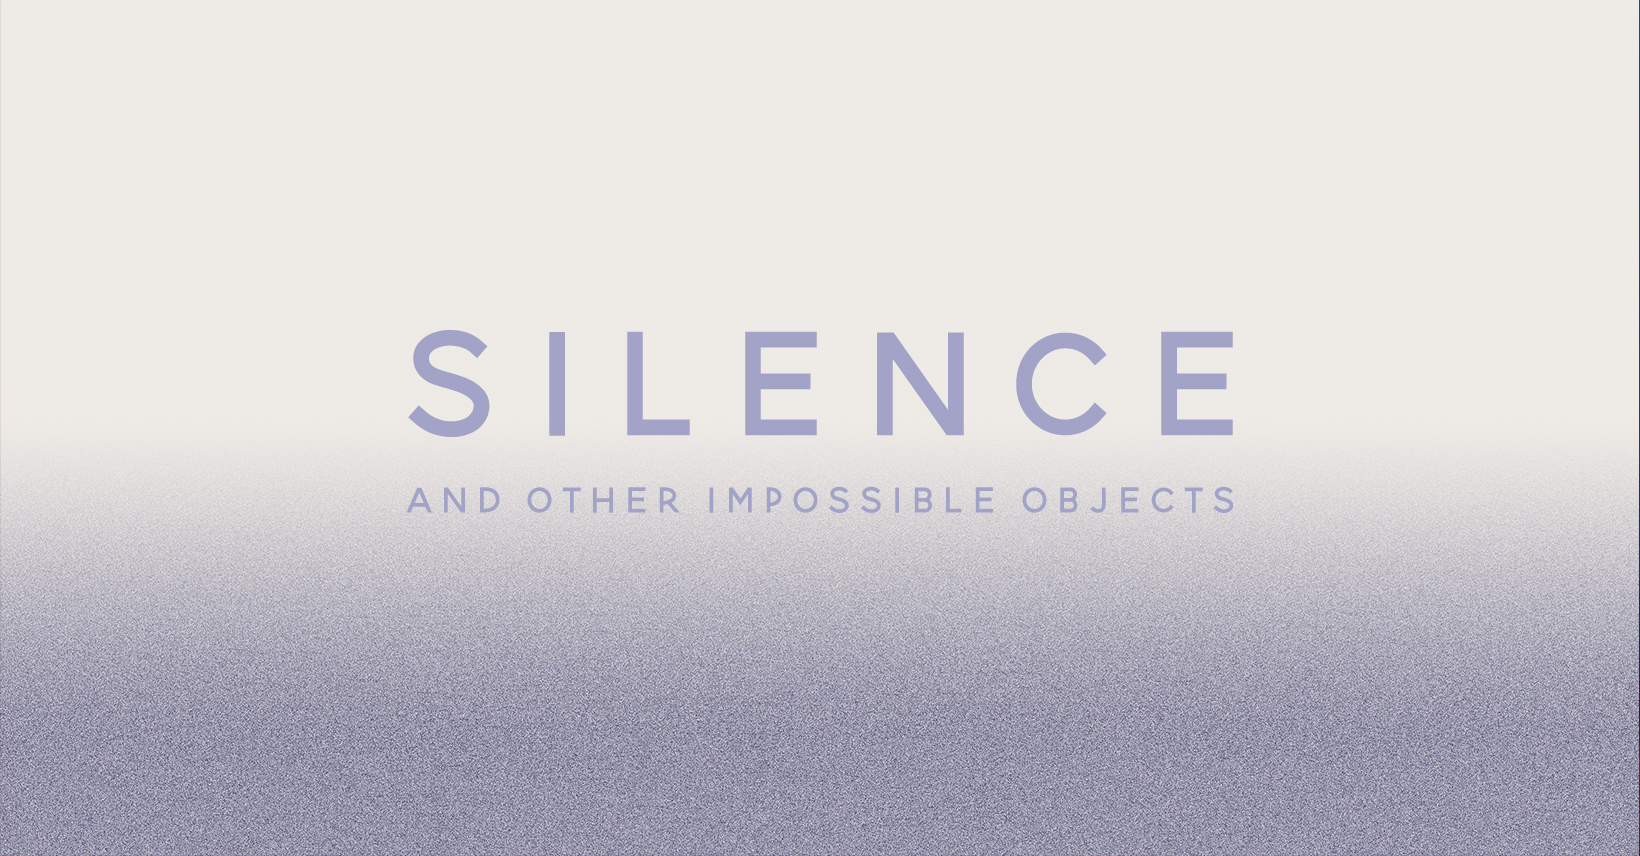 You are currently viewing Valtteri Alanen & co.: Silence and Other Impossible Objects